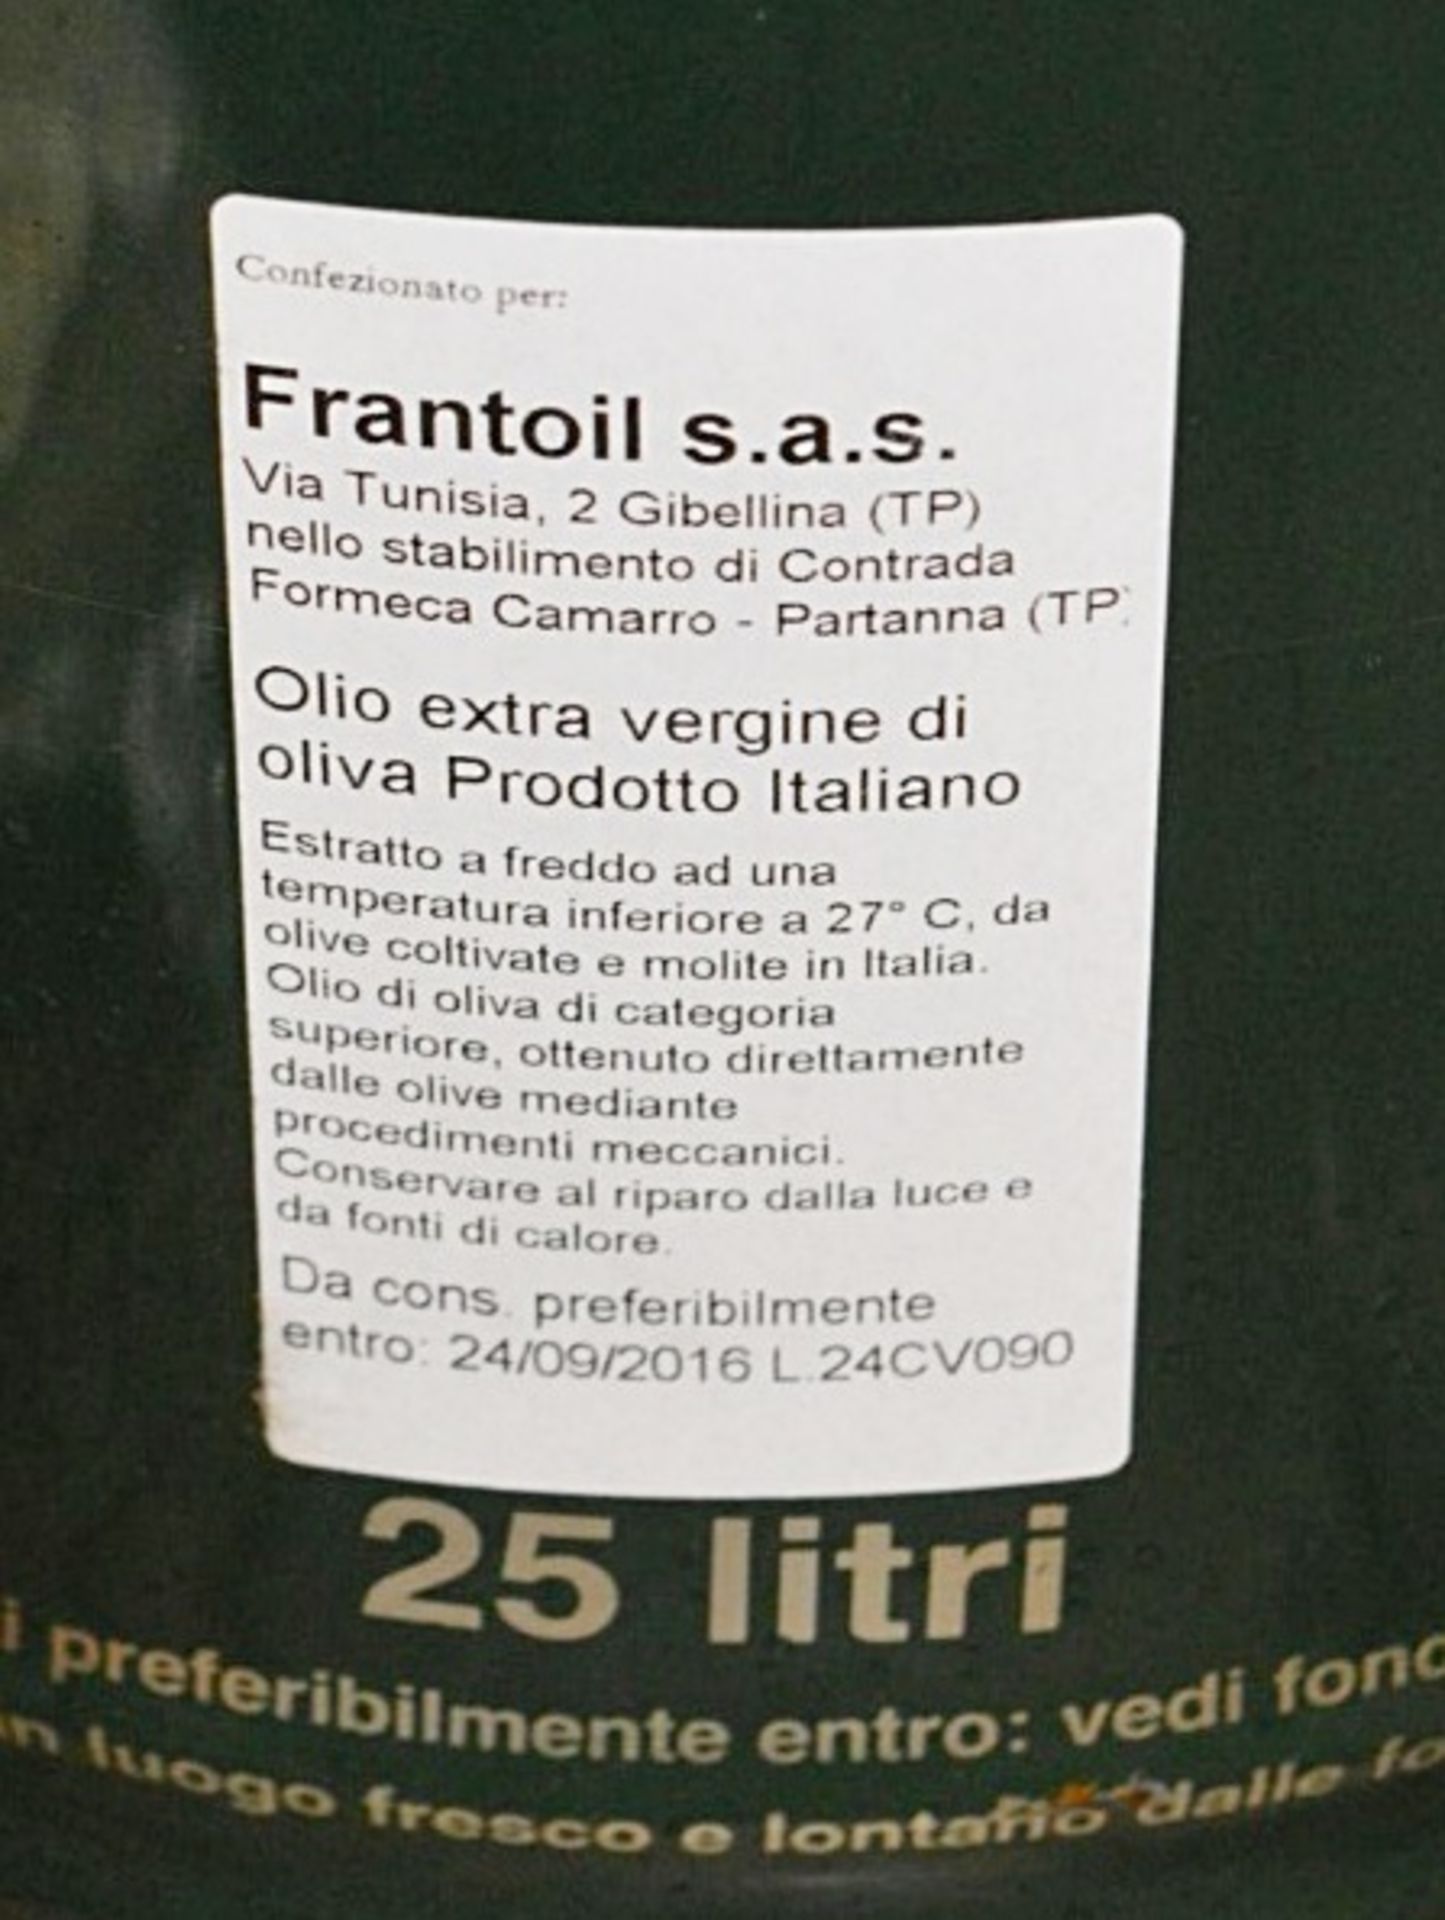 10 x 25-Litre Tubs of Extra Virgin Olive  Oil - Product Of Italy - Best Before 24/09/16 - Ref: BL043 - Image 2 of 2